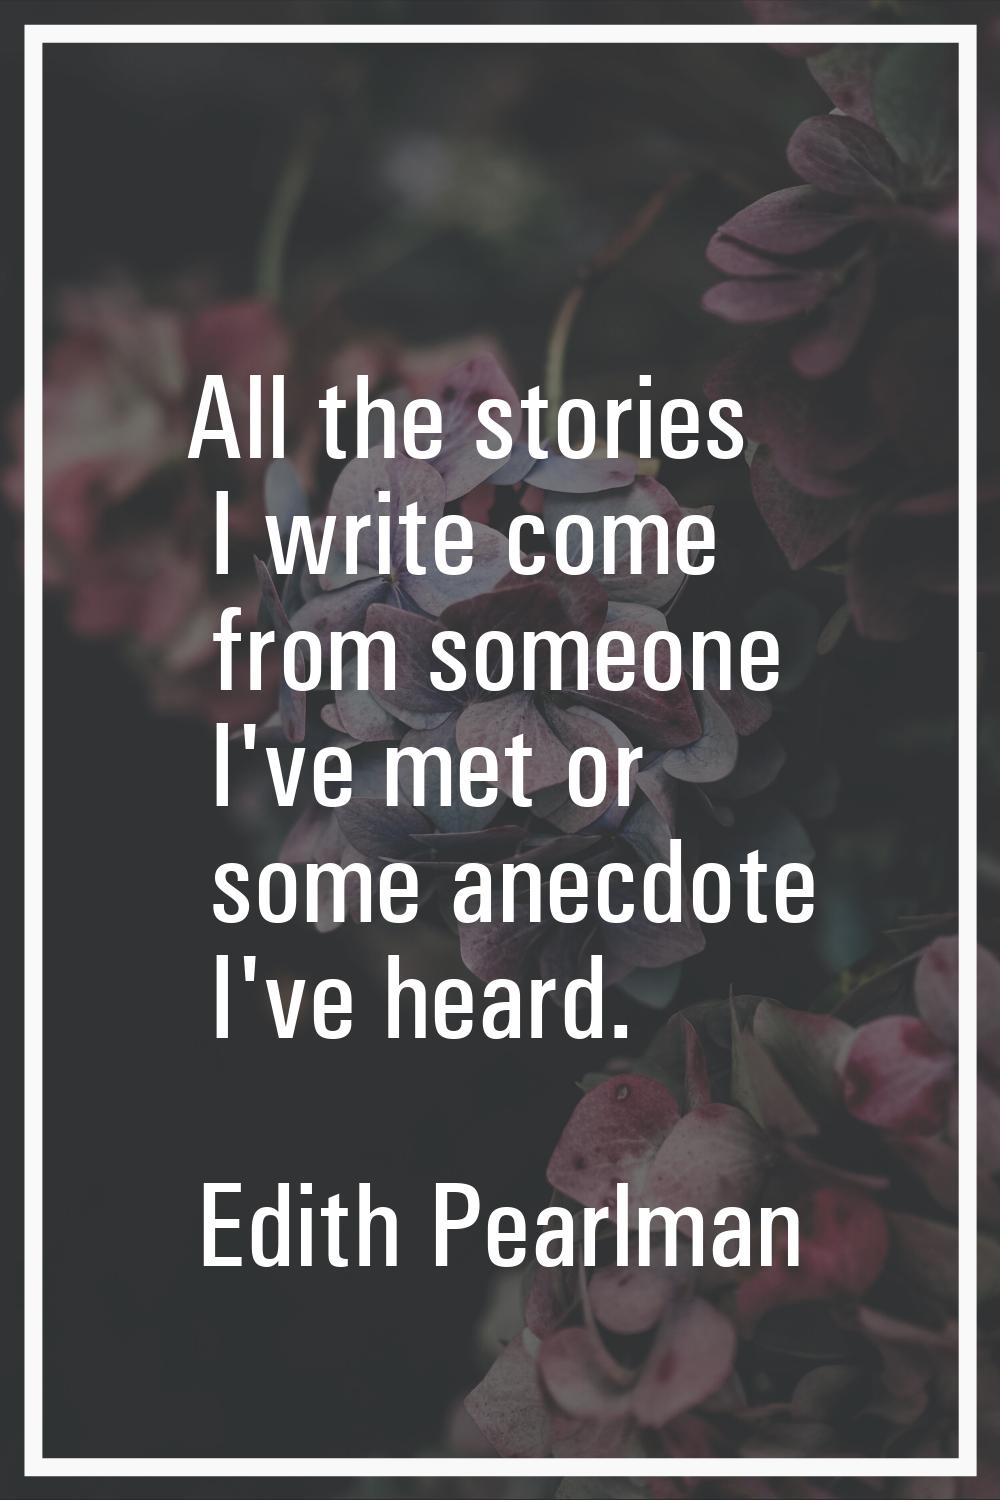 All the stories I write come from someone I've met or some anecdote I've heard.